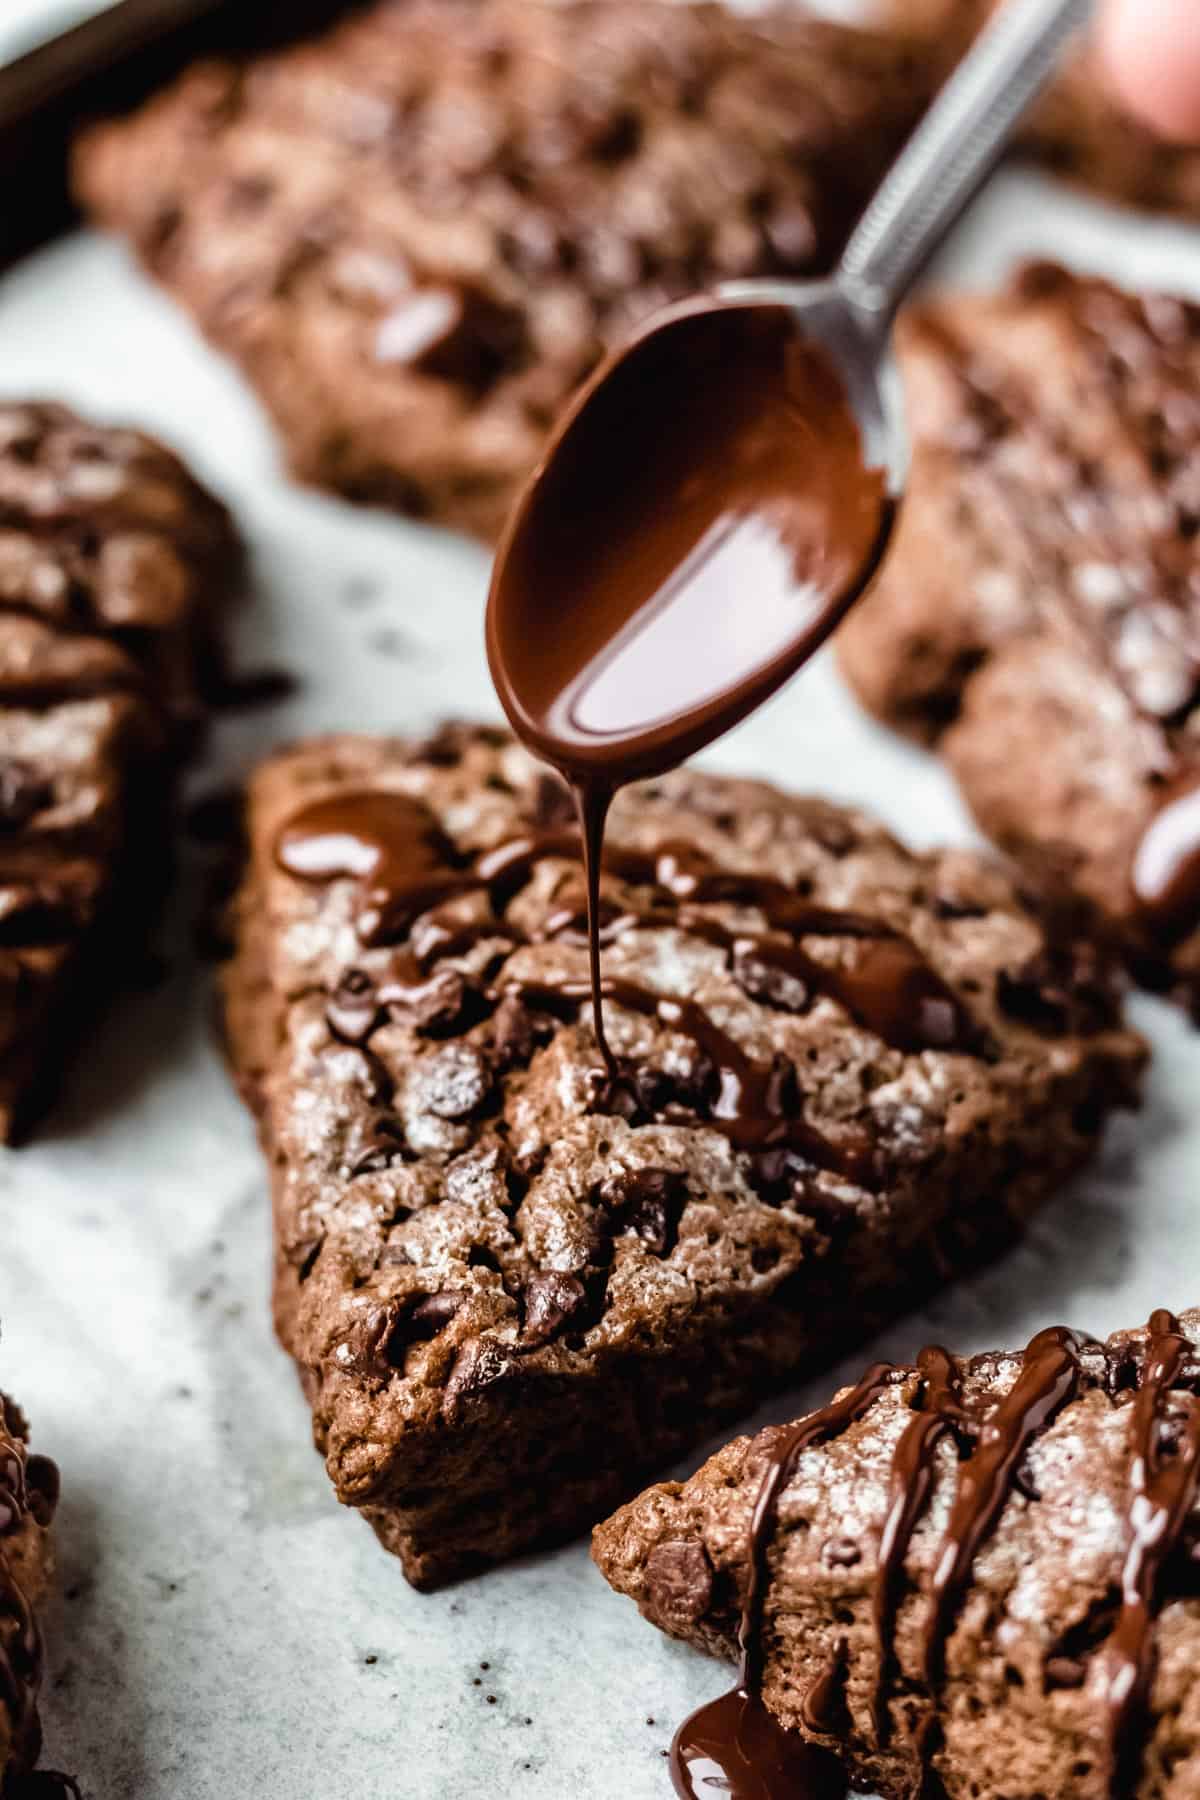 Melted chocolate being drizzled onto a chocolate scone.